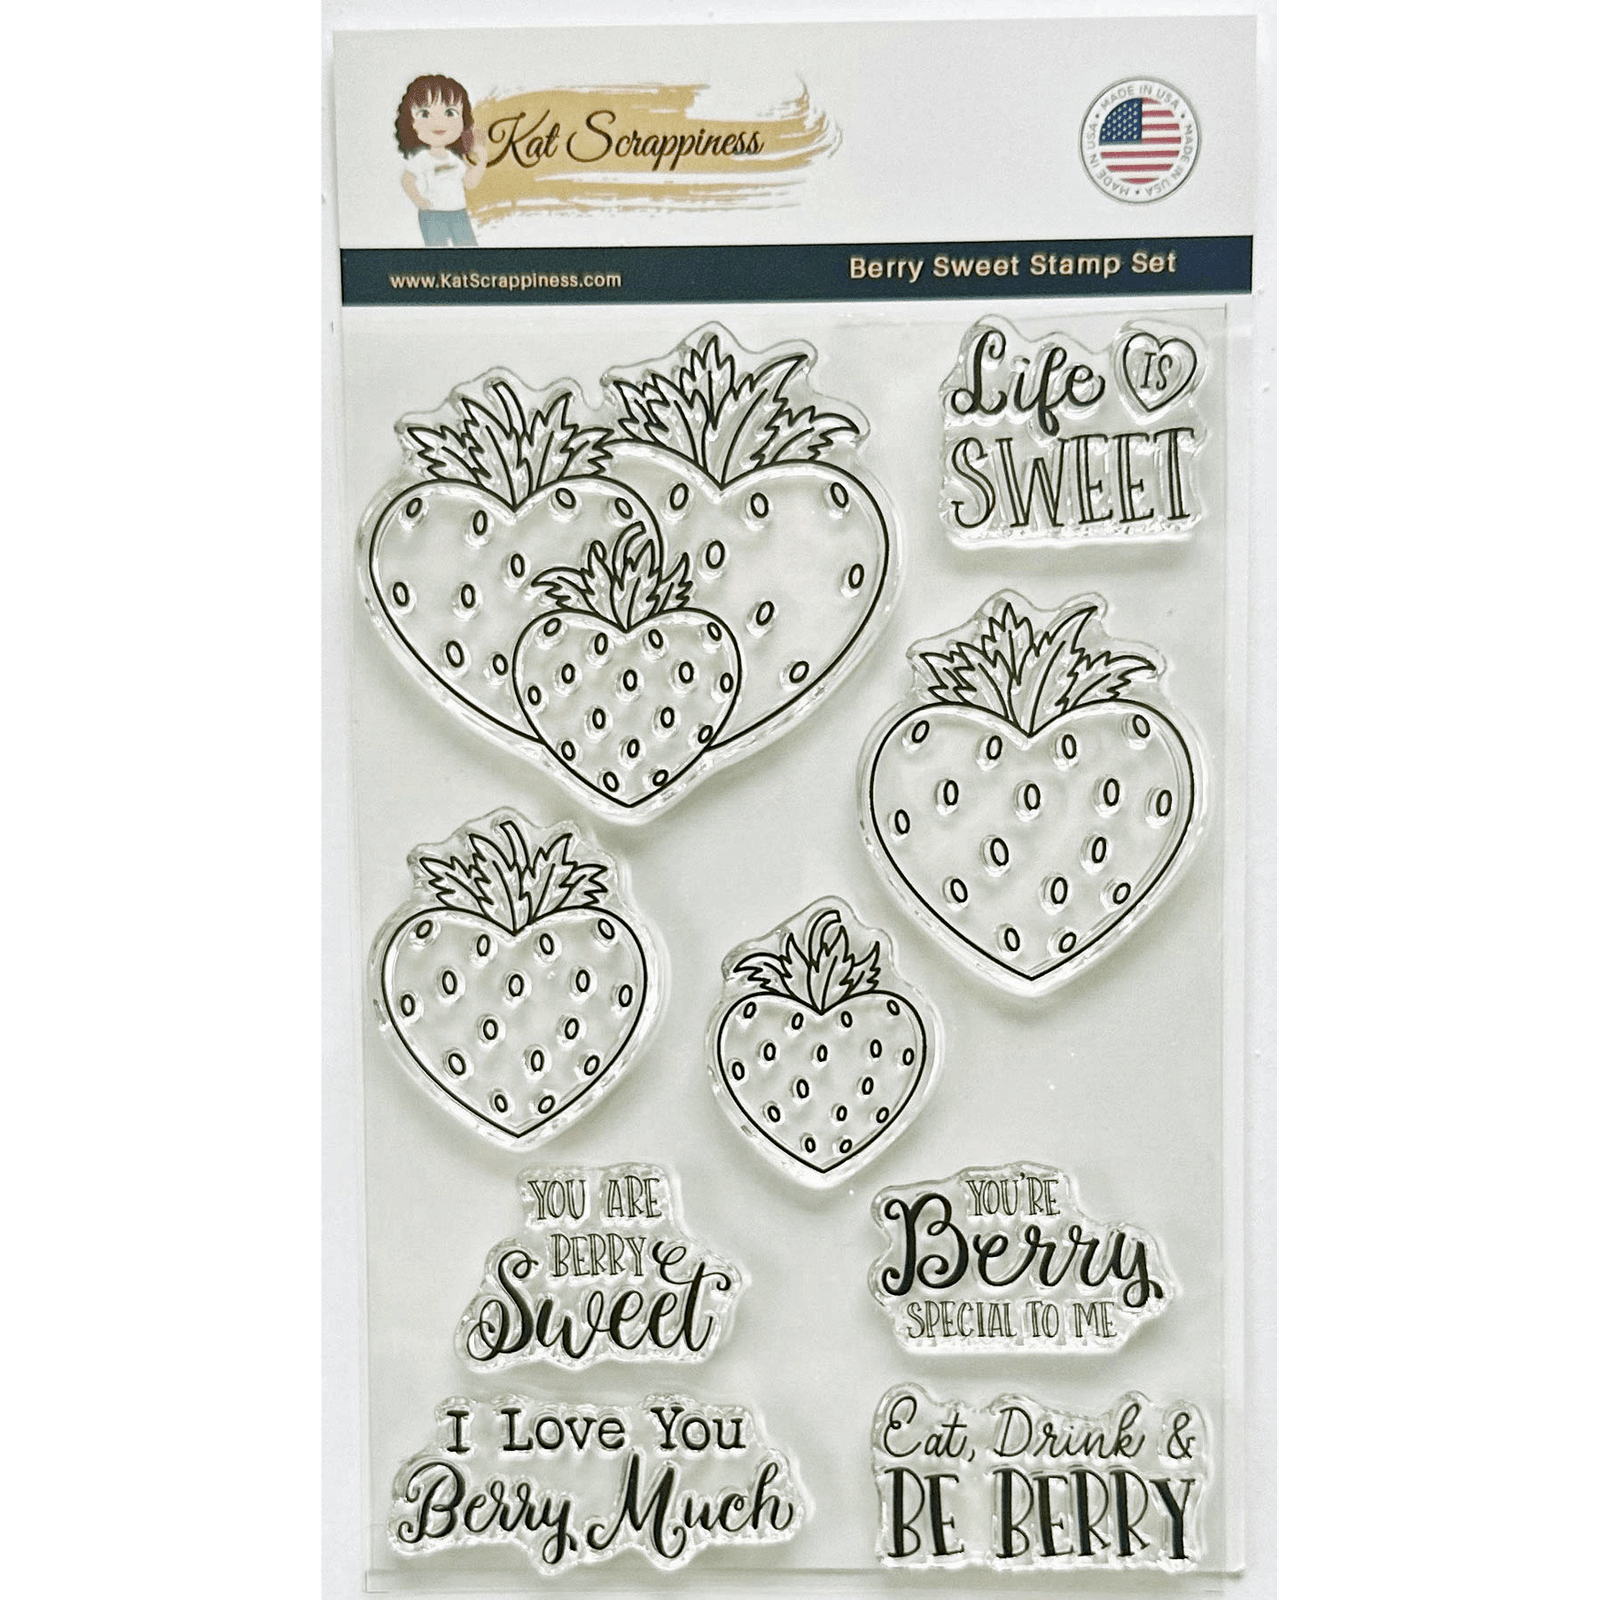 Serendipity stamps & dies  Valentines cards, Engagement anniversary card,  Cards